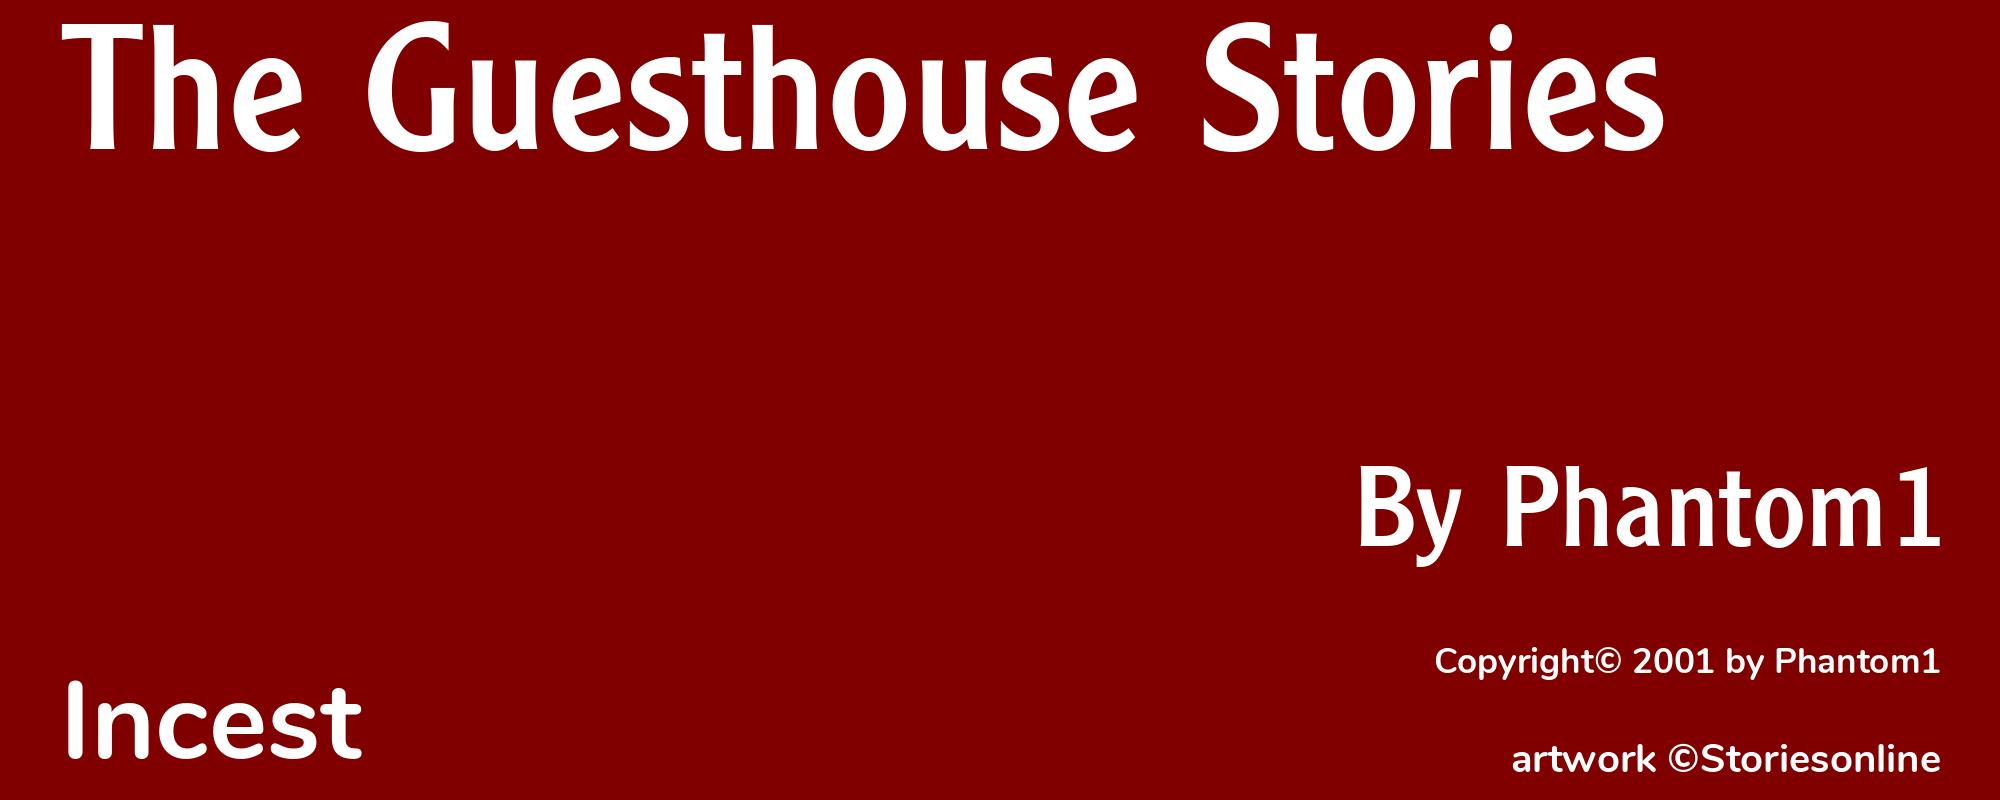 The Guesthouse Stories - Cover